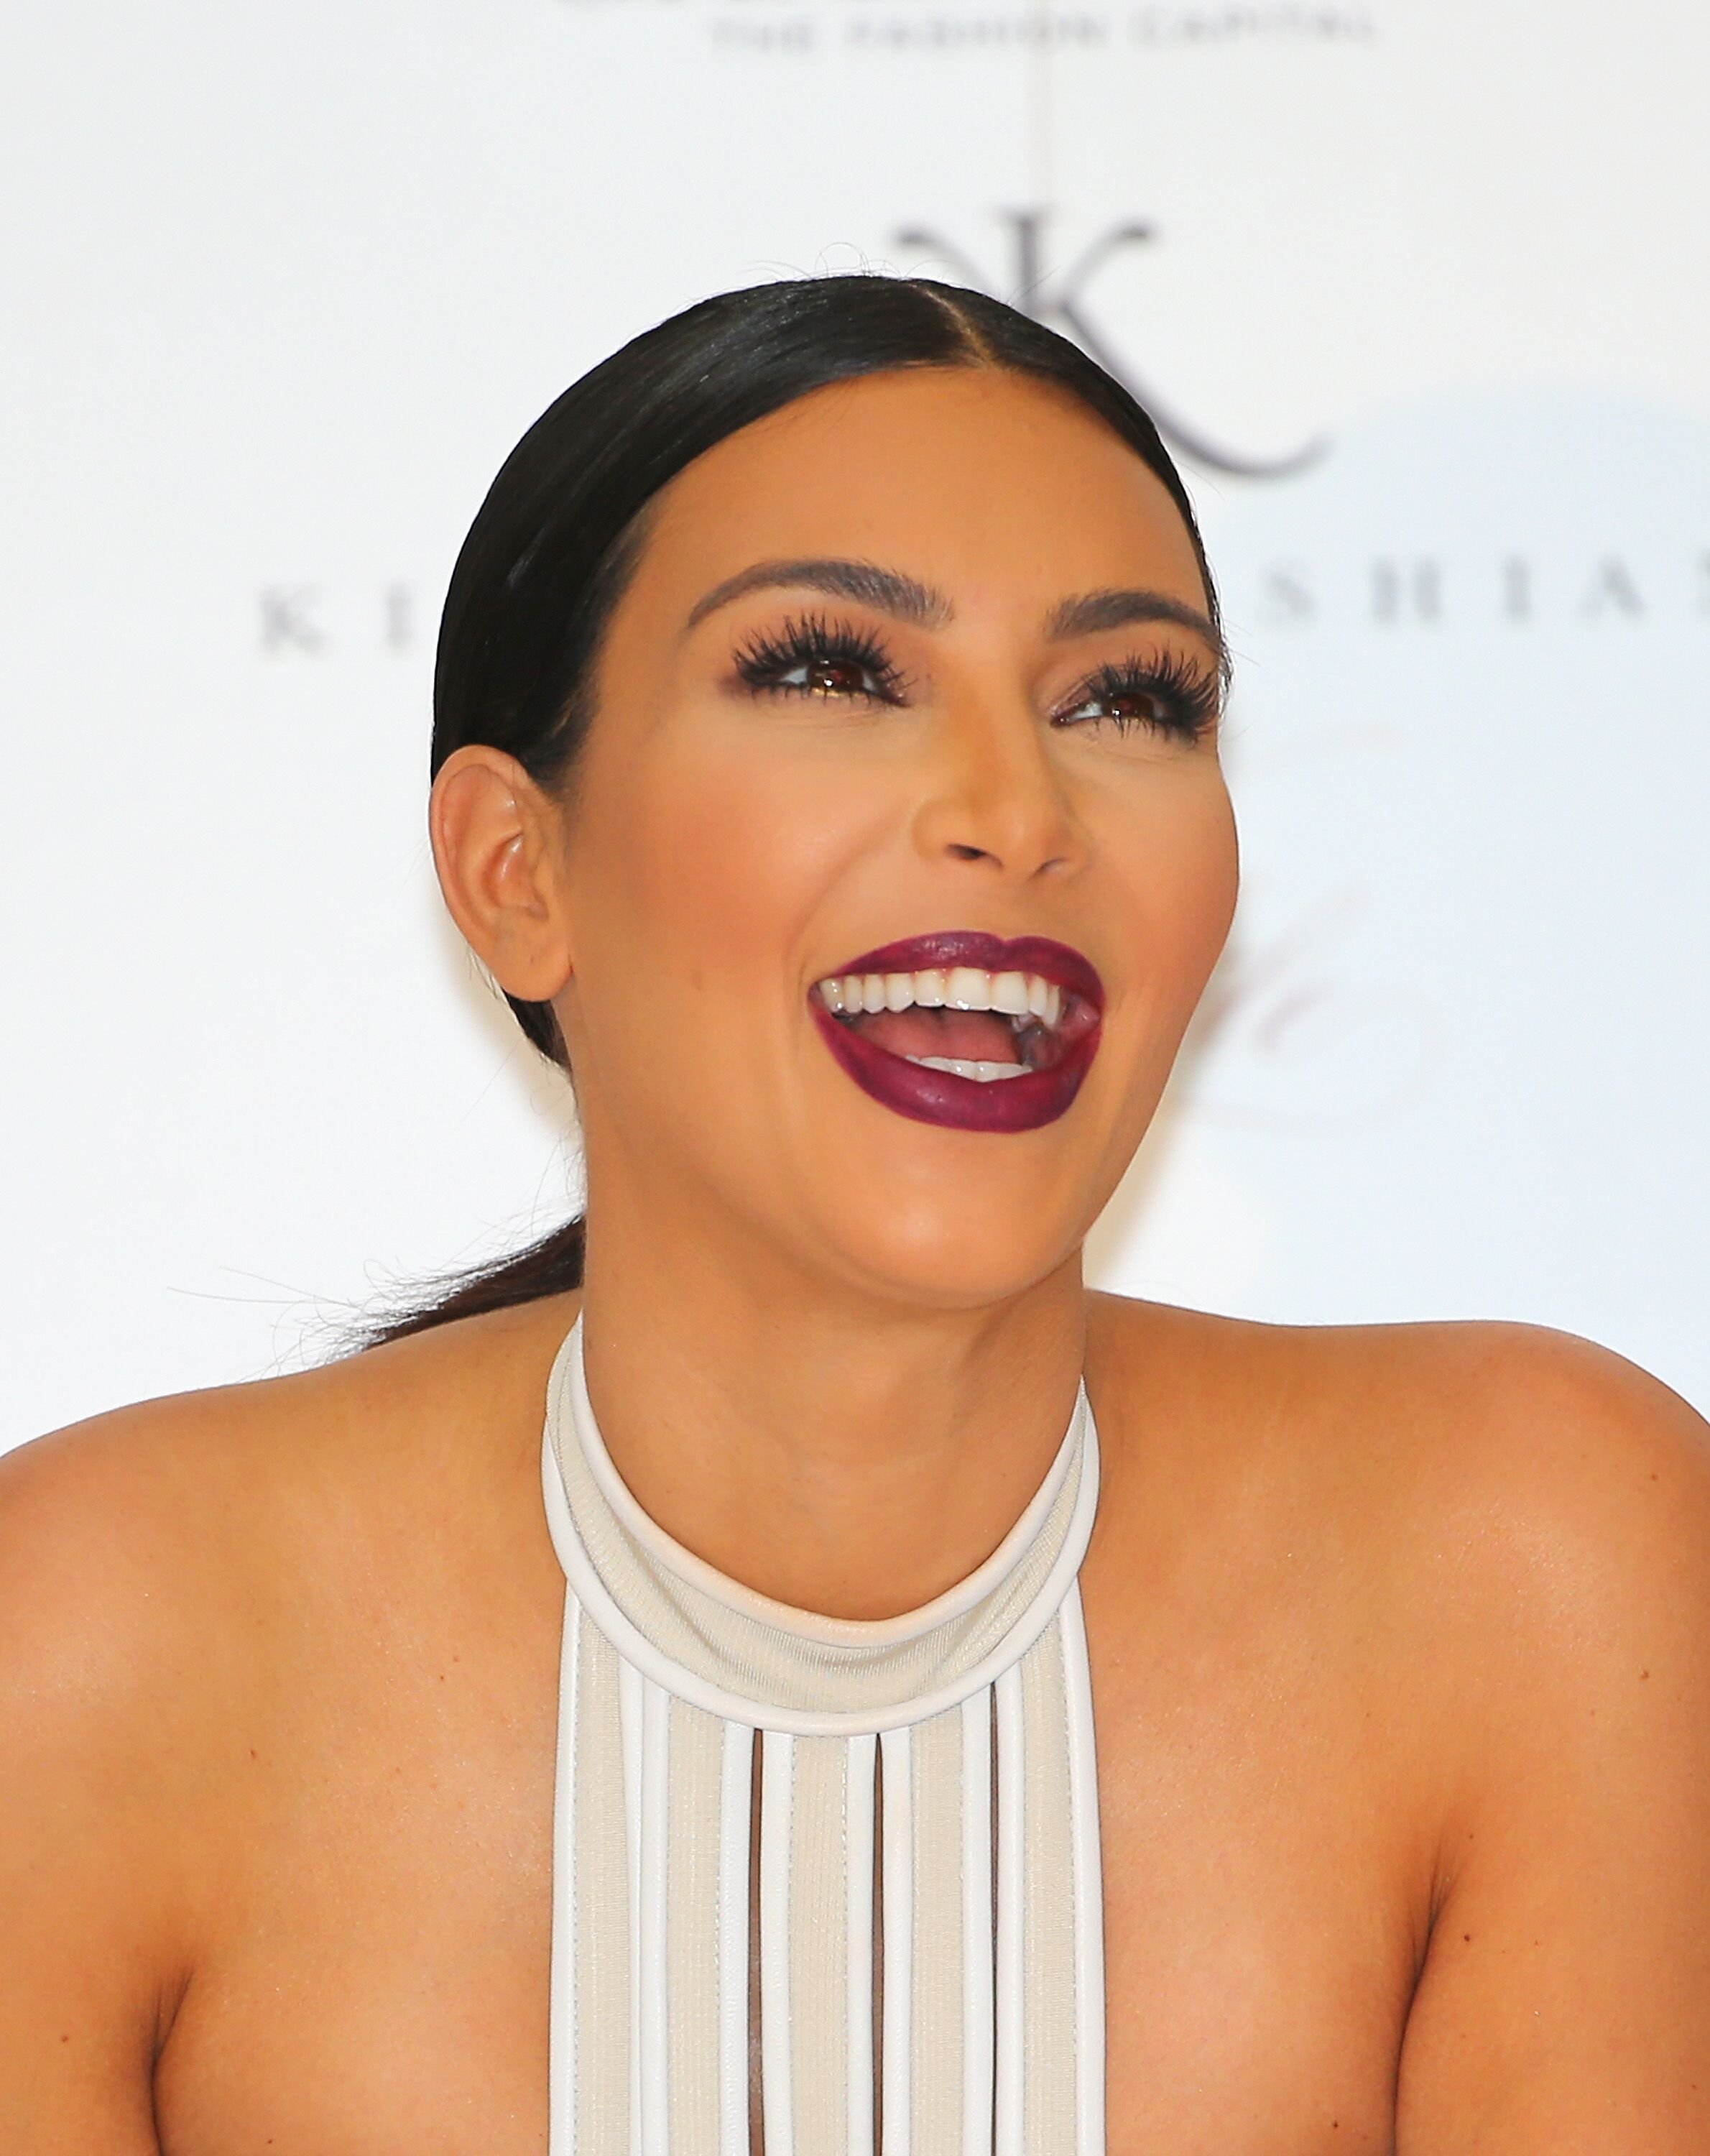  Kim Kardashian laughs as she promotes her new fragrance "Fleur Fatale" at Chadstone Shopping Centre | Photo: Getty Images